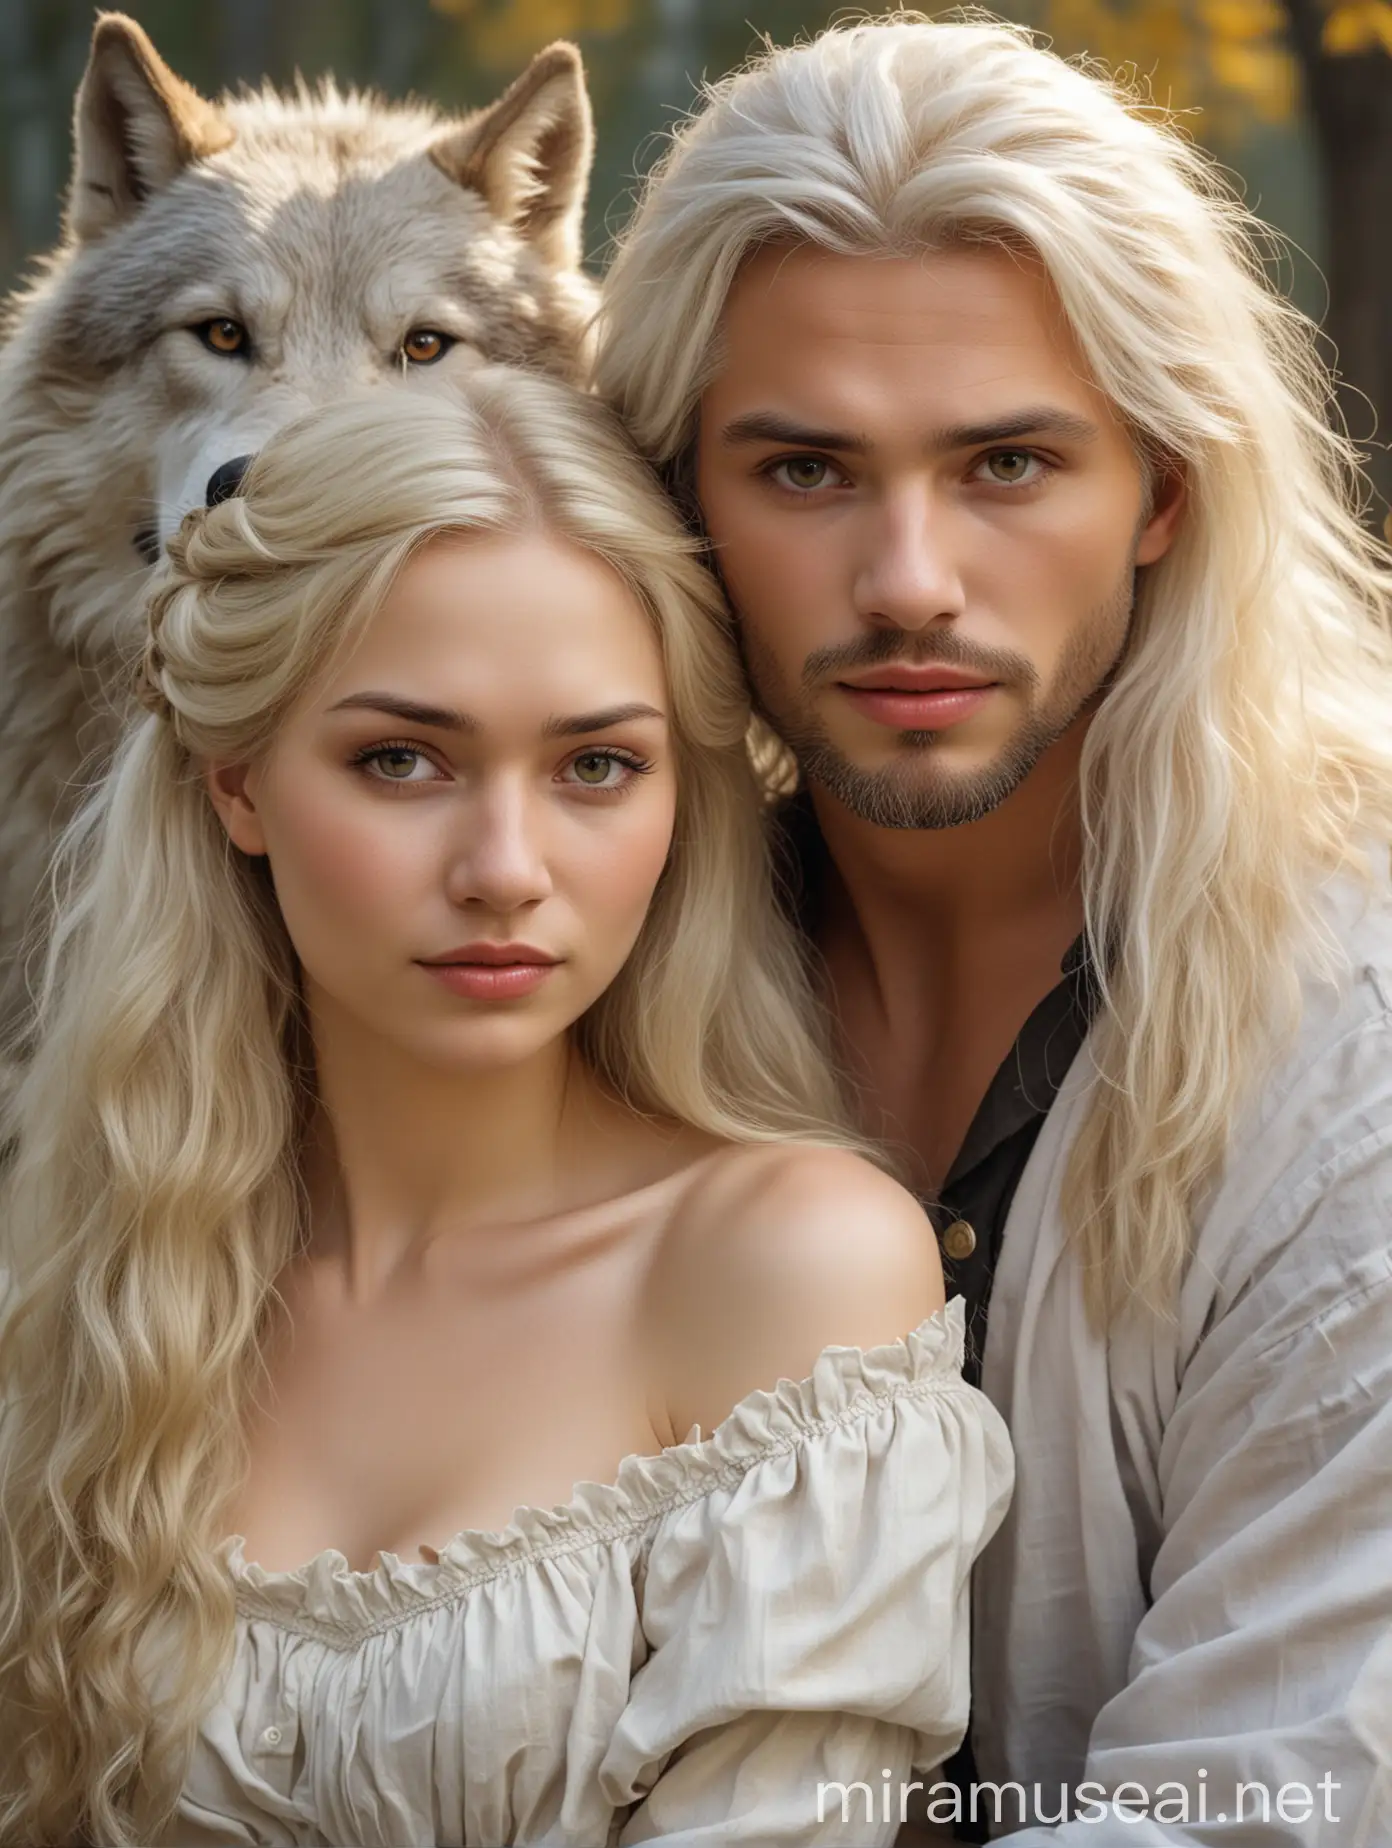 GoldenHaired Woman and WhiteHaired Wolf Man in 1850